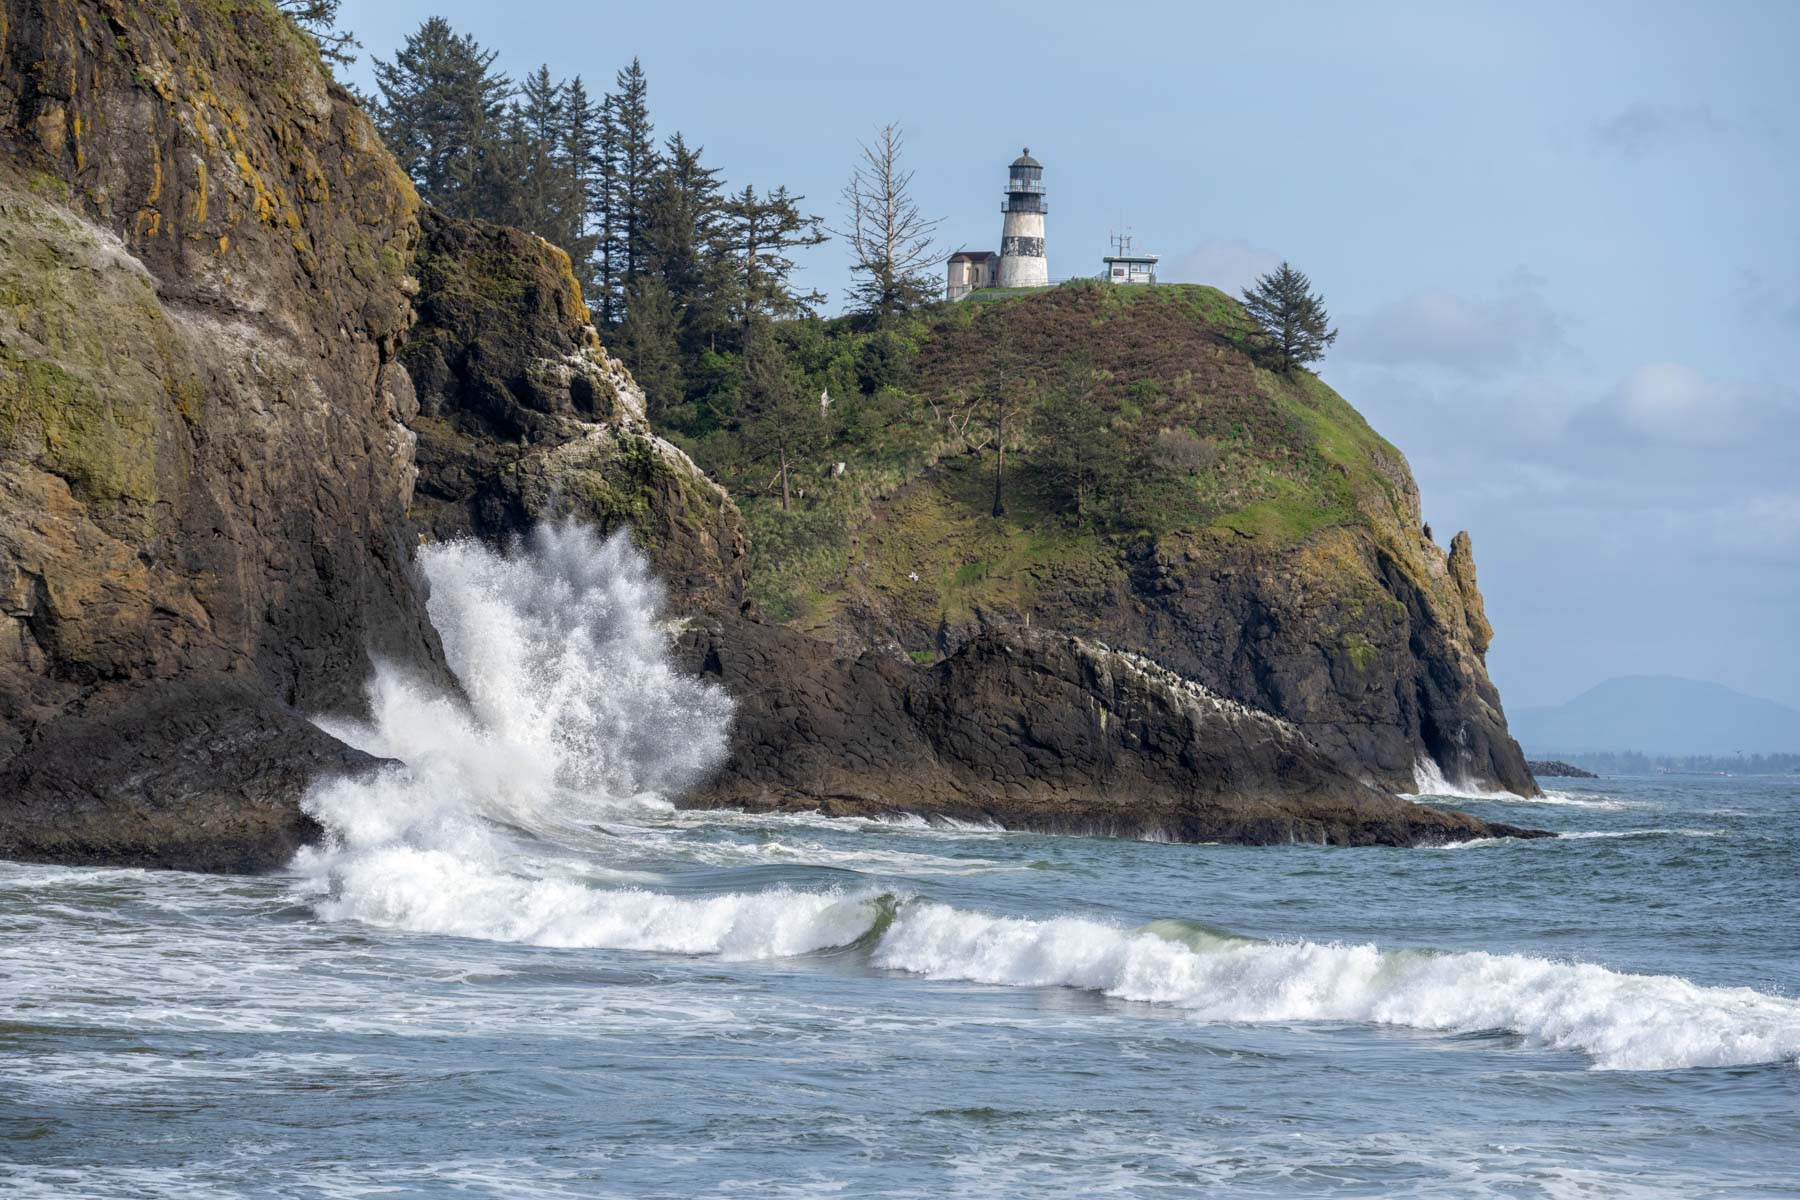 Cape Disappointment Lighthouse seen from Waikiki Beach